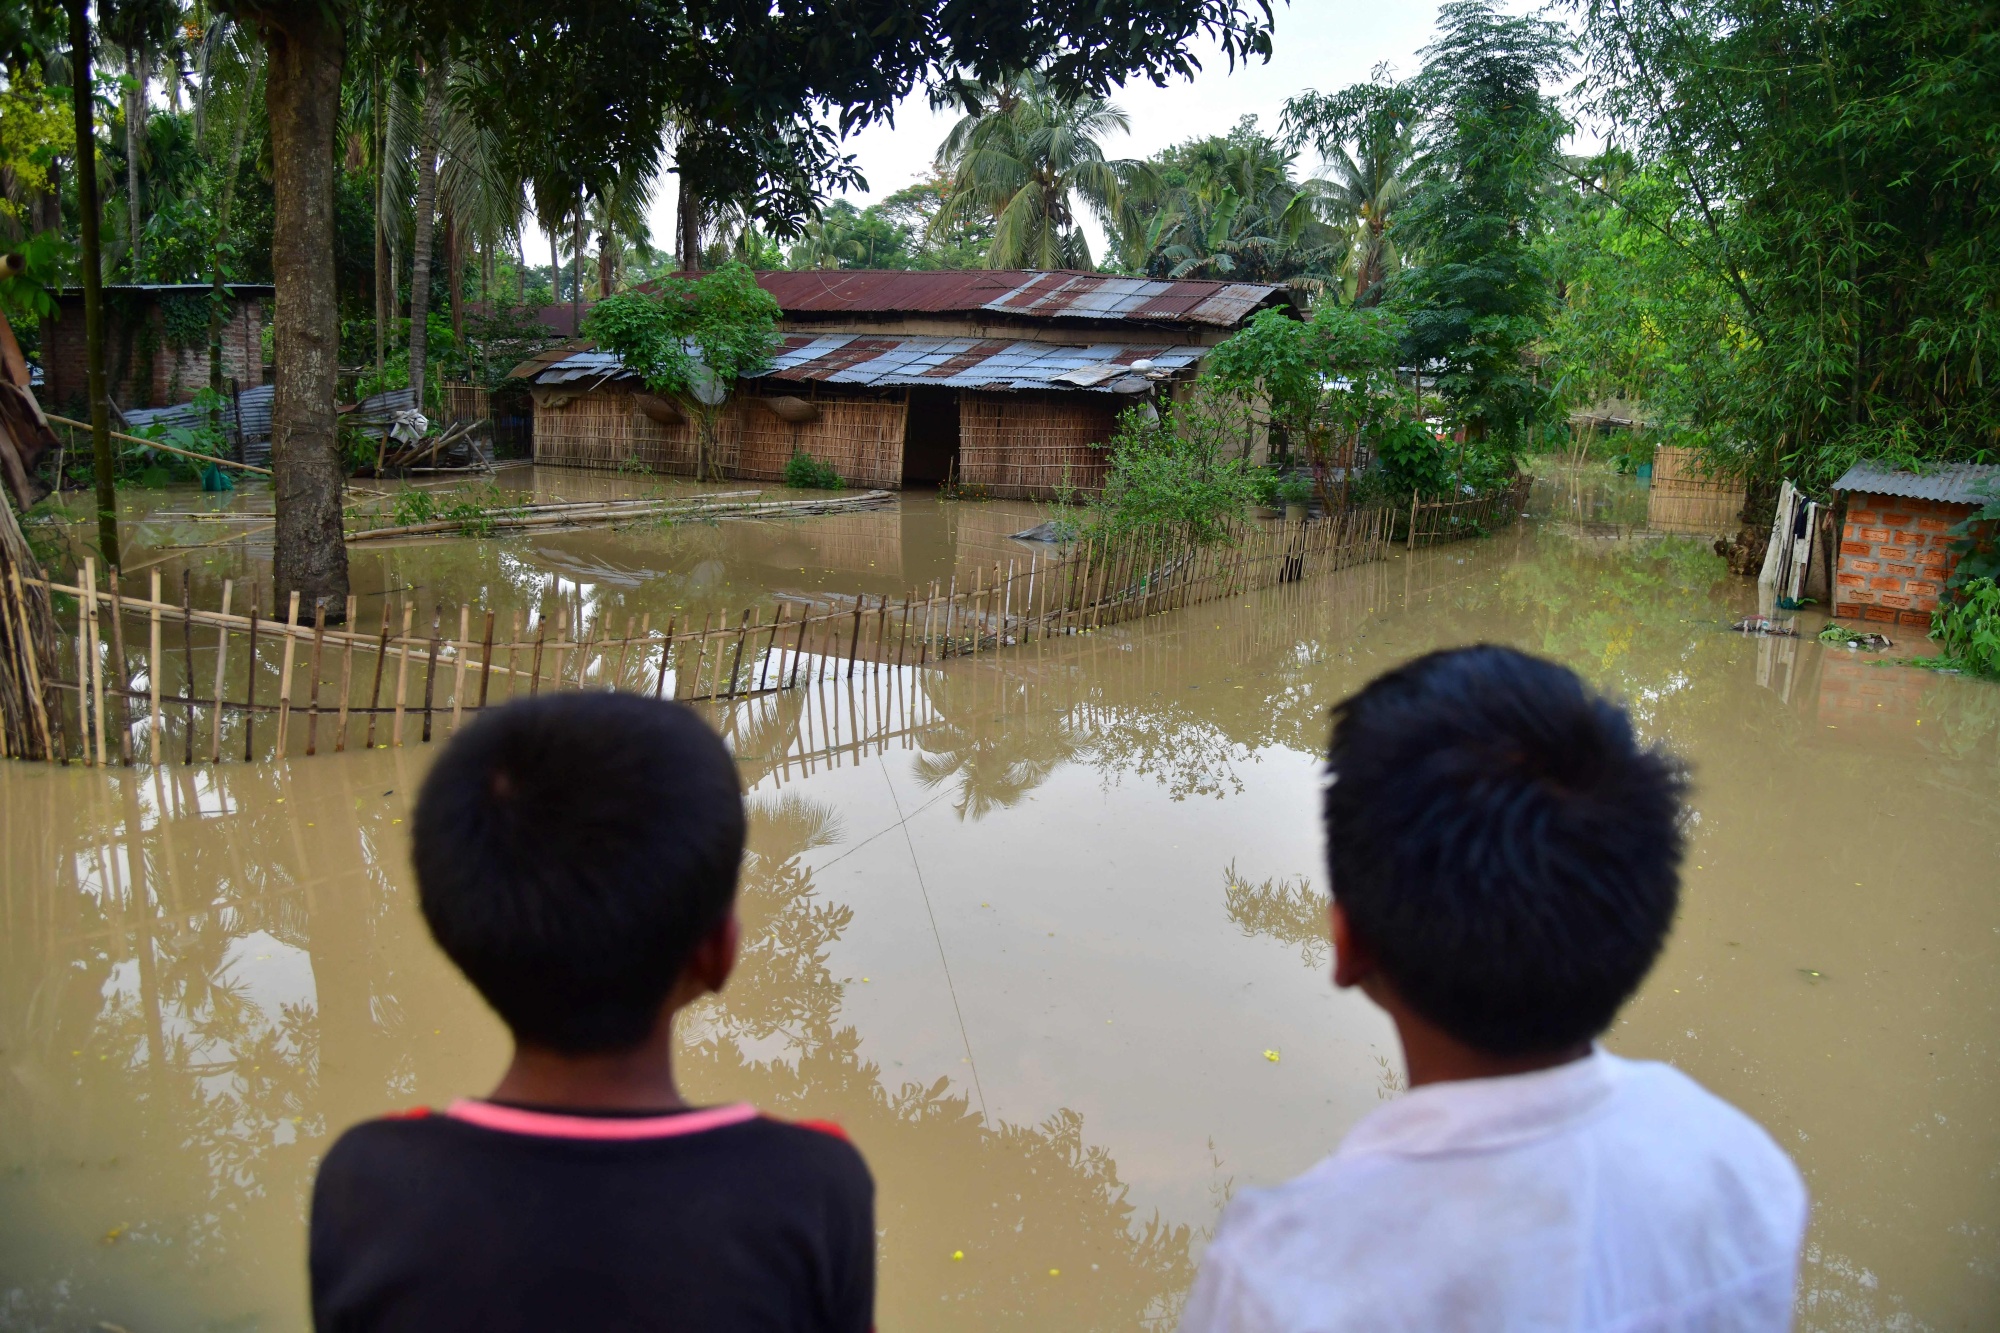 Children look at their partially submerged house after heavy rains in Morigaon district of India's Assam state on May 23.